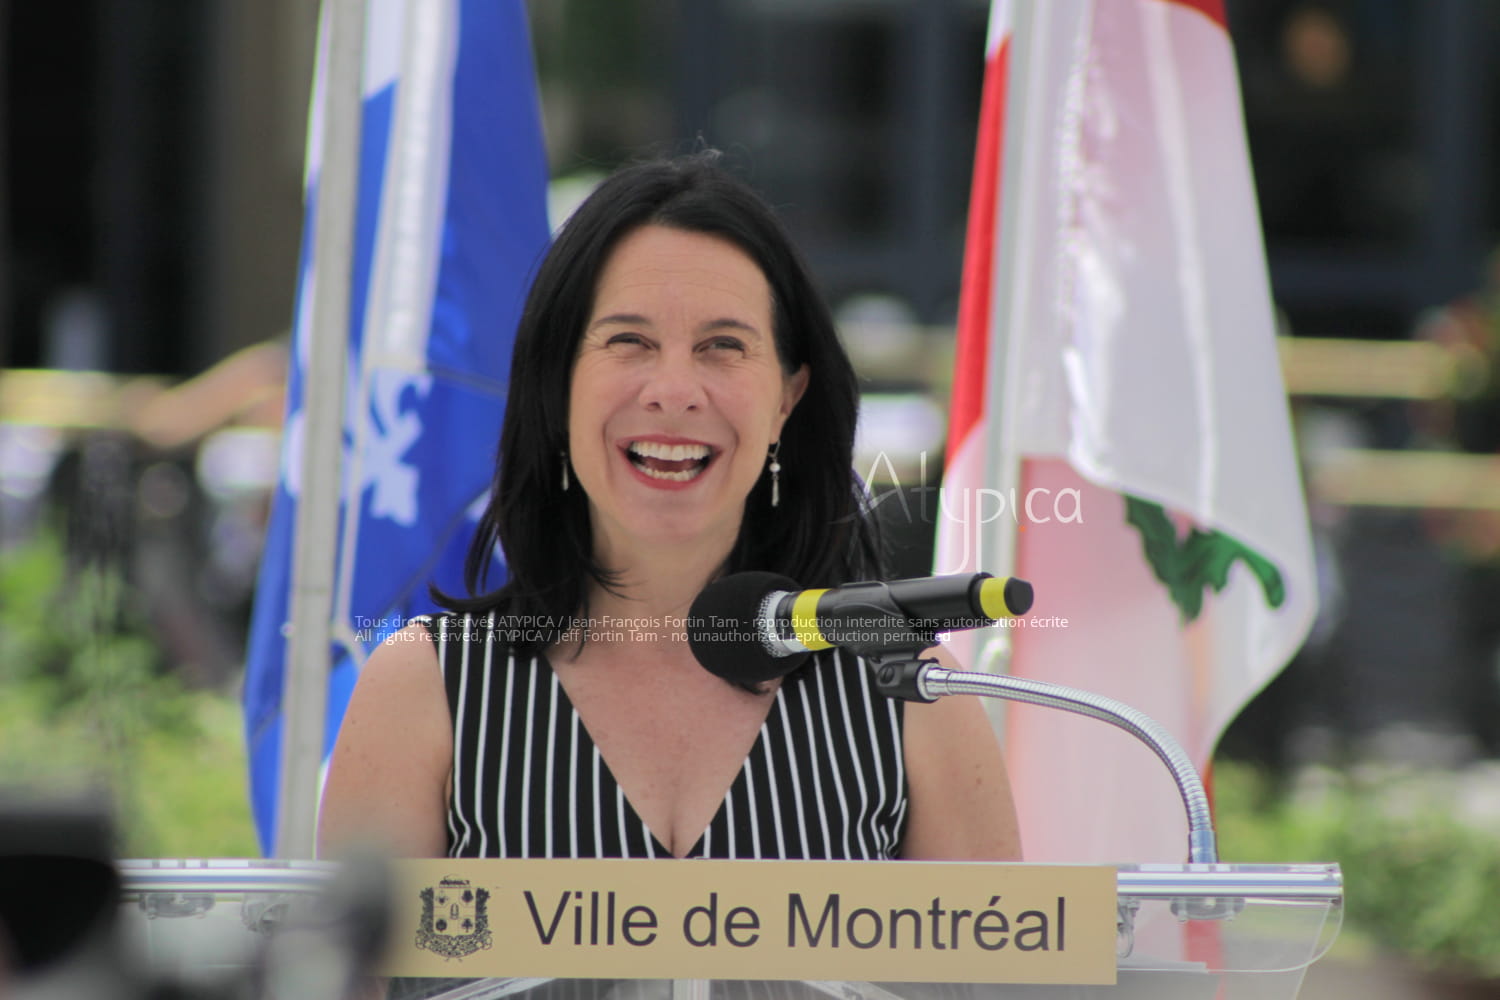 Portrait of Montreal mayoress Valérie Plante ("Projet Montréal" party) candidly smiling and laughing before giving a speech